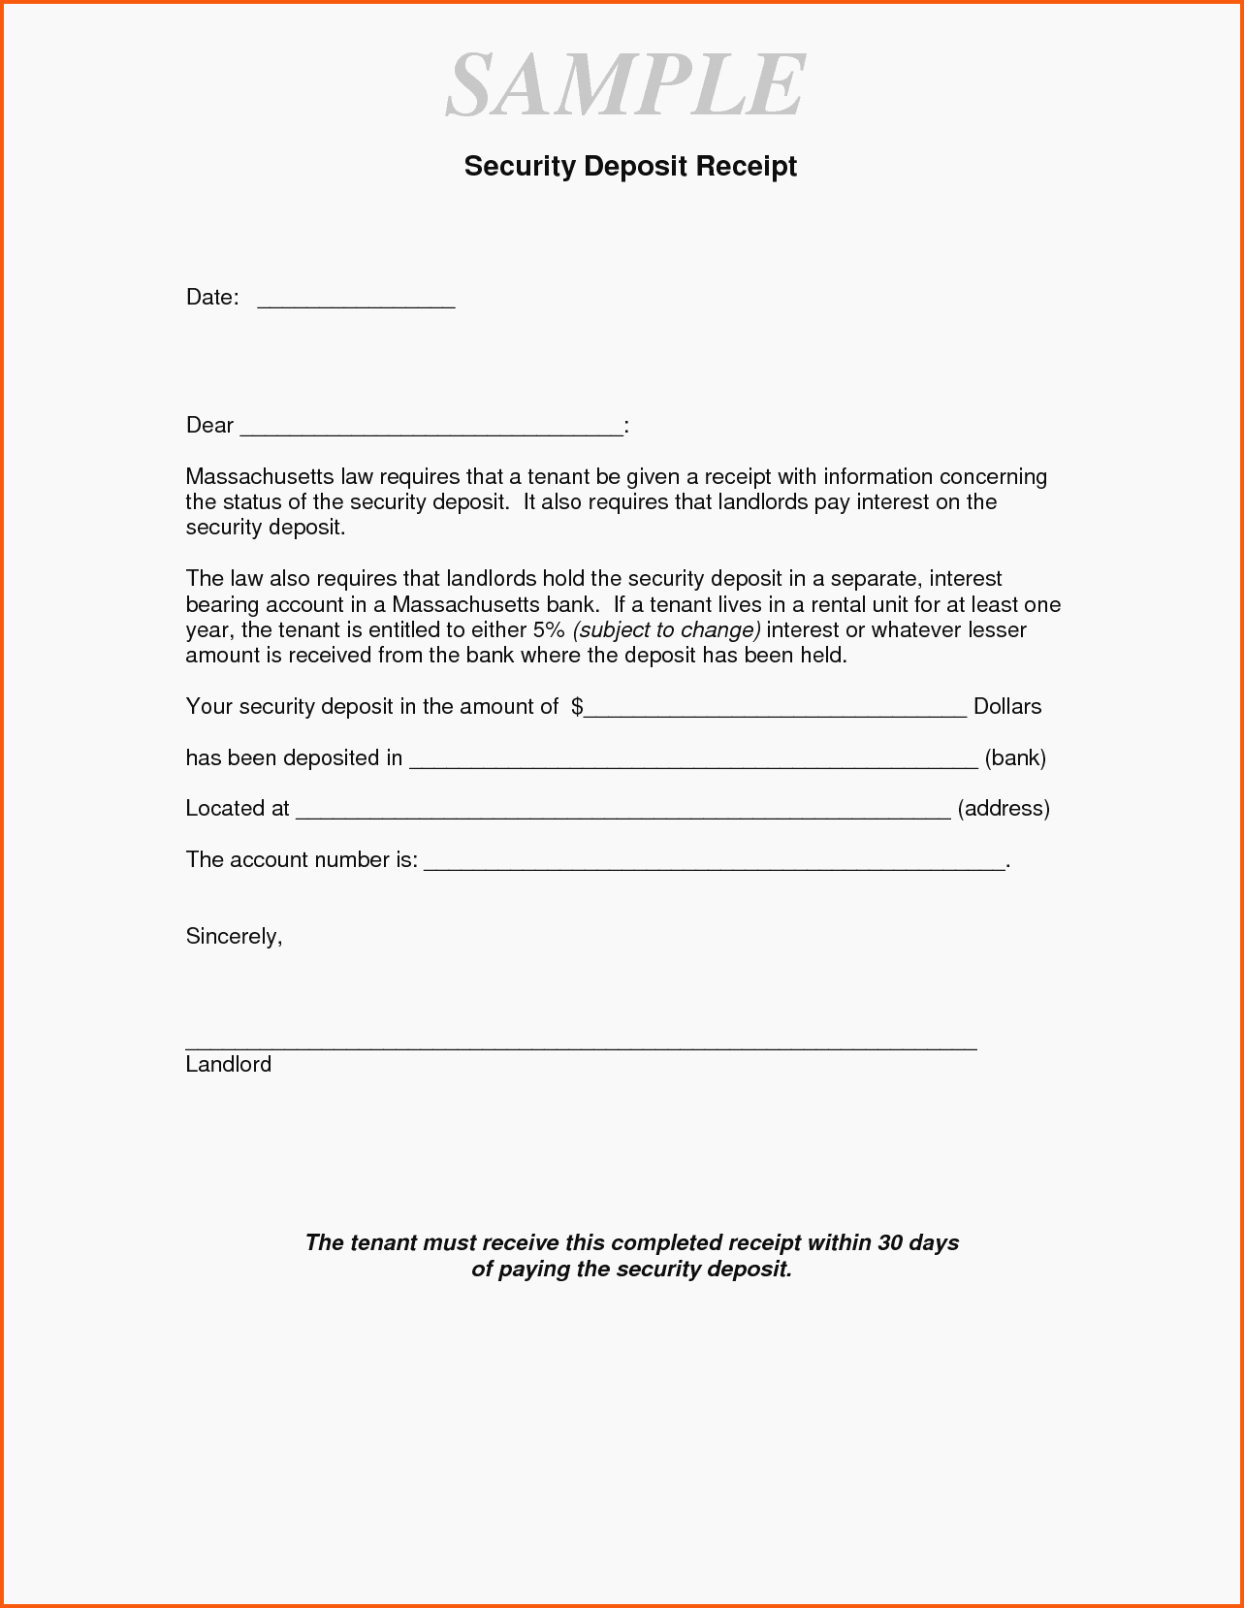 Security Deposit Receipt Template Awesome How You Can attend Rental